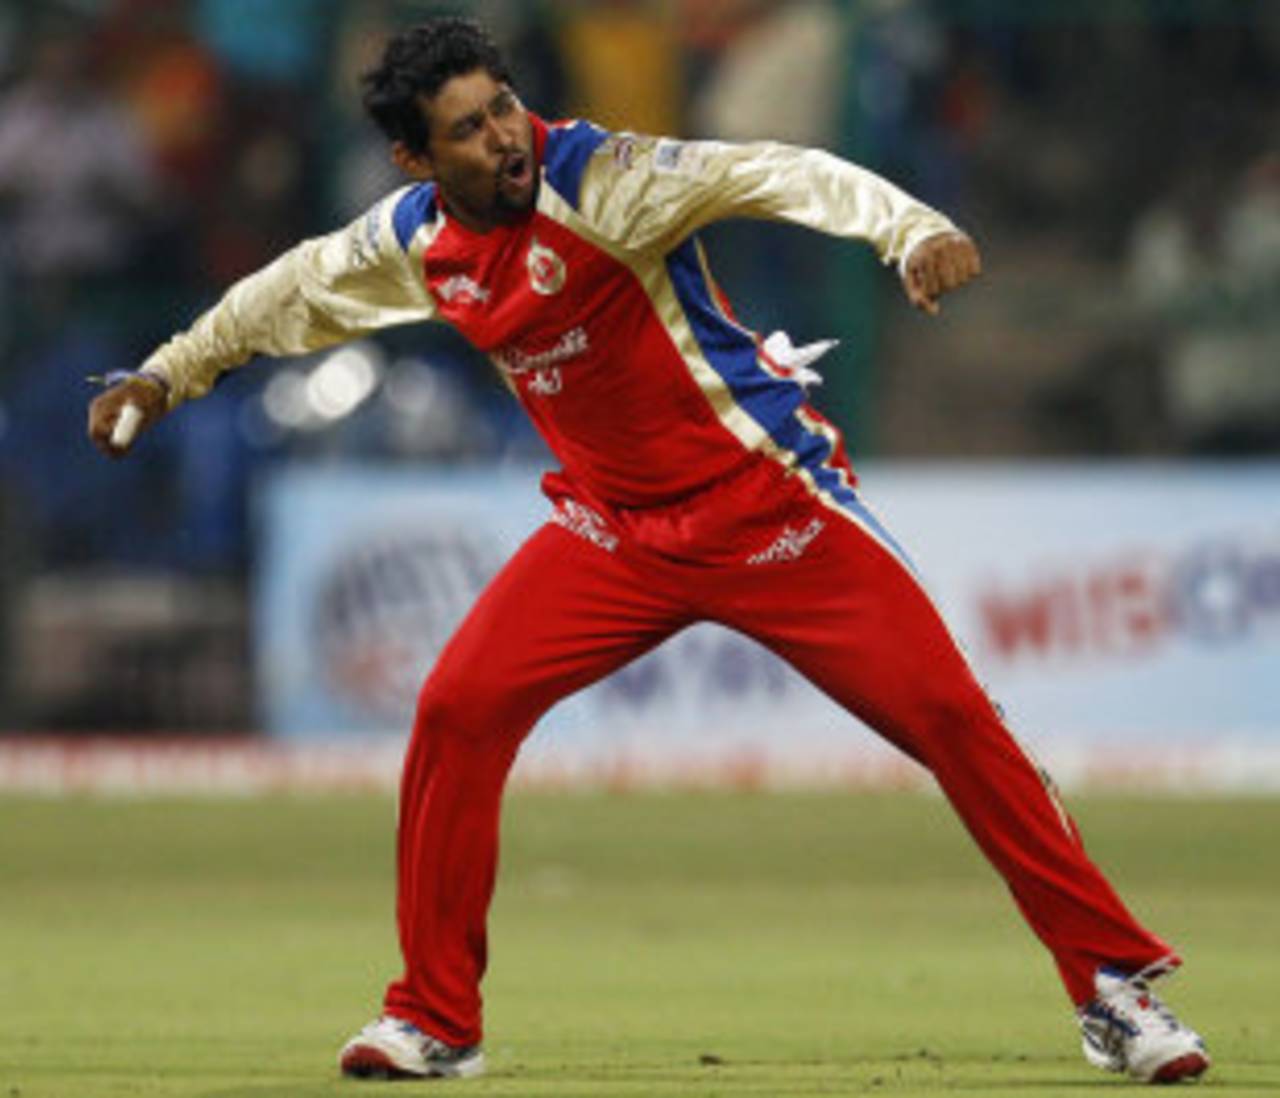 Tillakaratne Dilshan bowled superbly but the rest of the Royal Challengers bowlers continue to struggle&nbsp;&nbsp;&bull;&nbsp;&nbsp;Associated Press